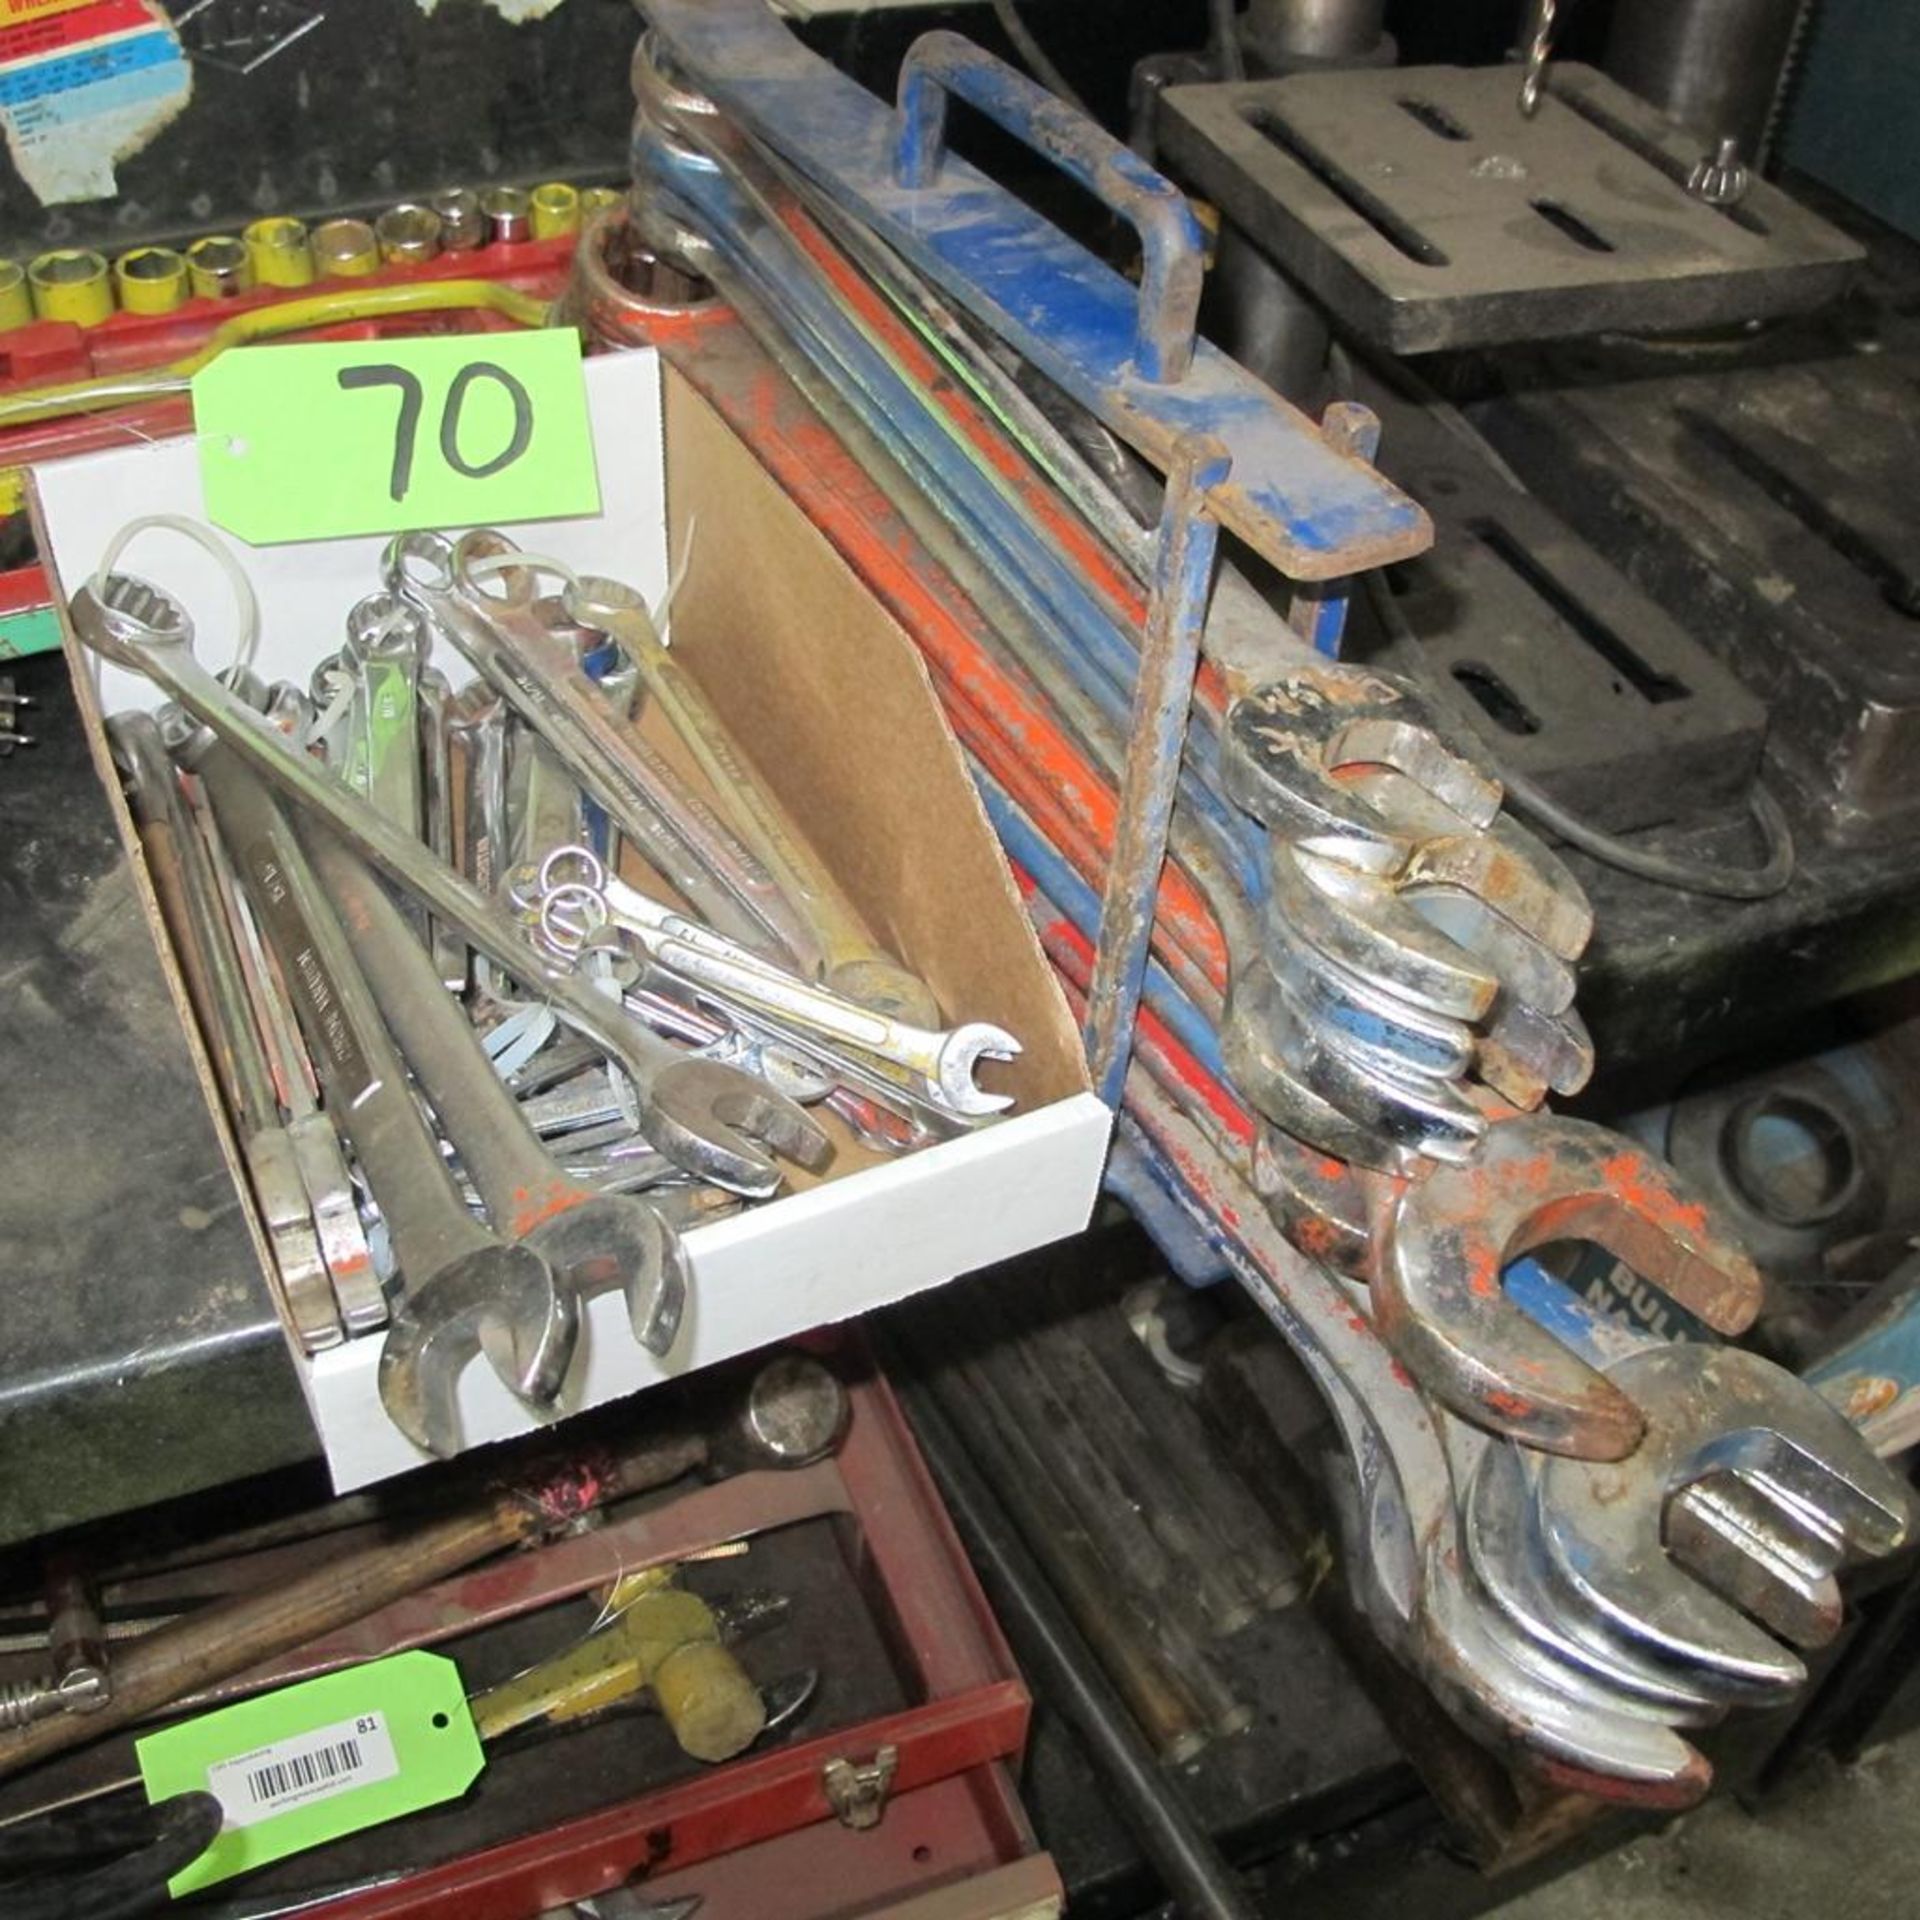 LOT OF LARGE HAND WRENCH SET AND BOX OF SMALL HAND WRENCHES (IN WEST BLDG)